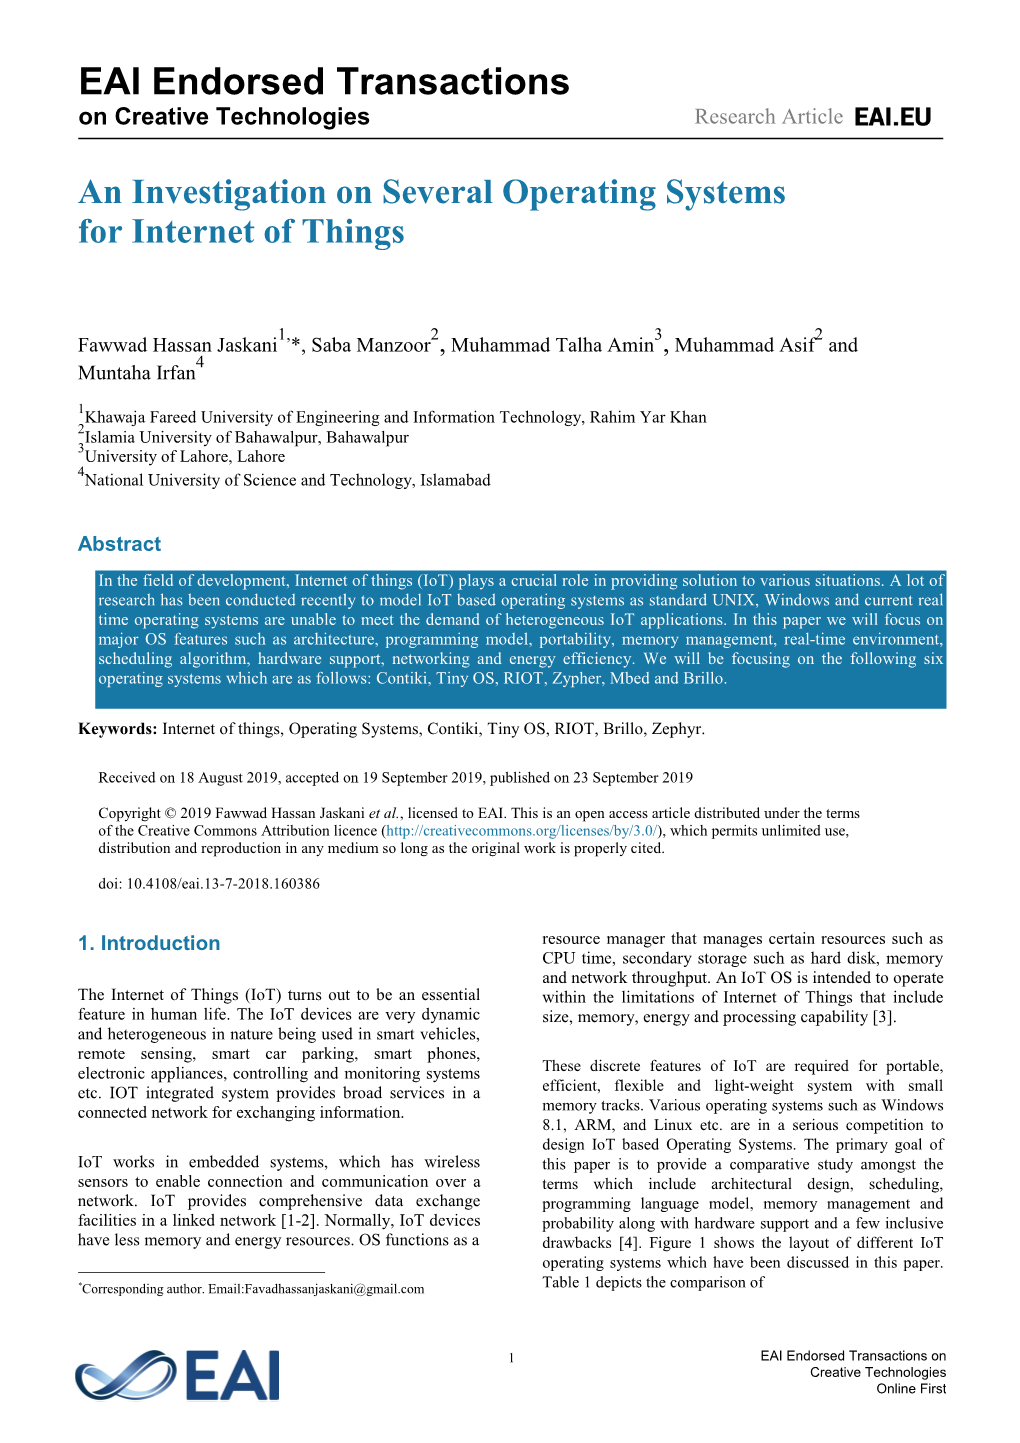 An Investigation on Several Operating Systems for Internet of Things